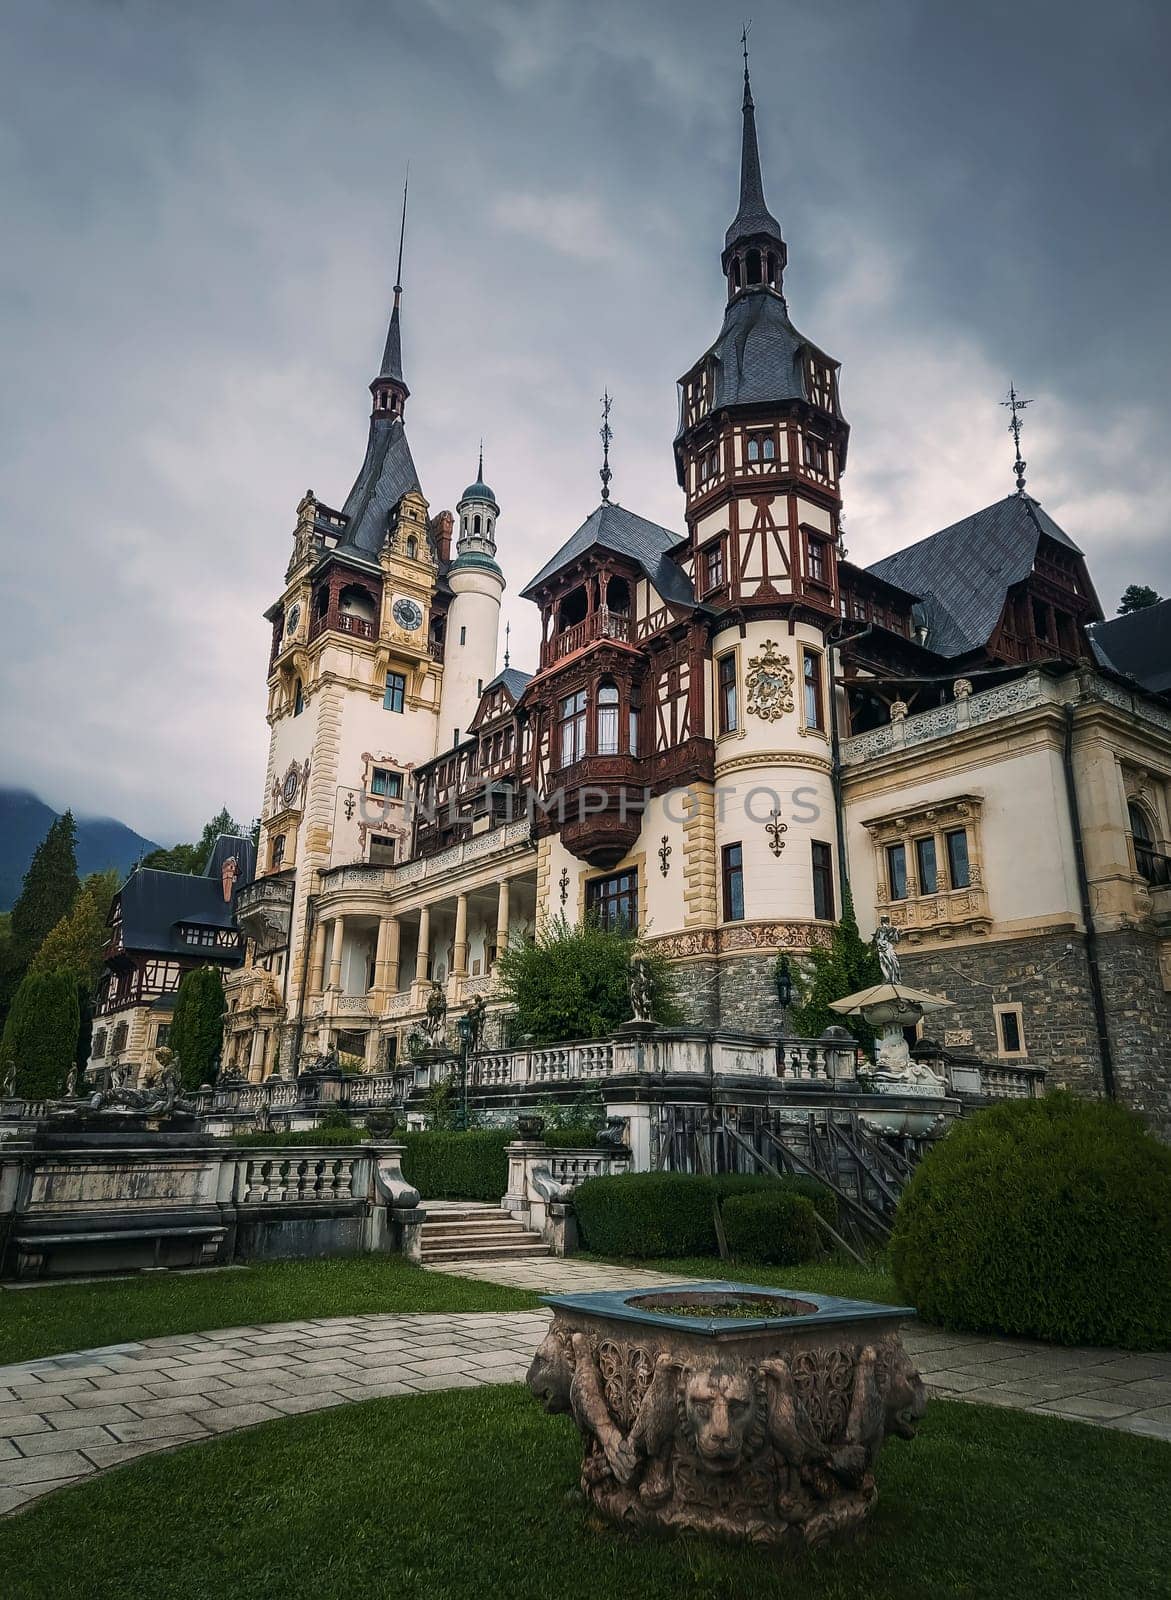 Peles Castle in Sinaia, Romania. Famous Neo-Renaissance palace of the royal family located in the heart of Carpathian mountains. by psychoshadow